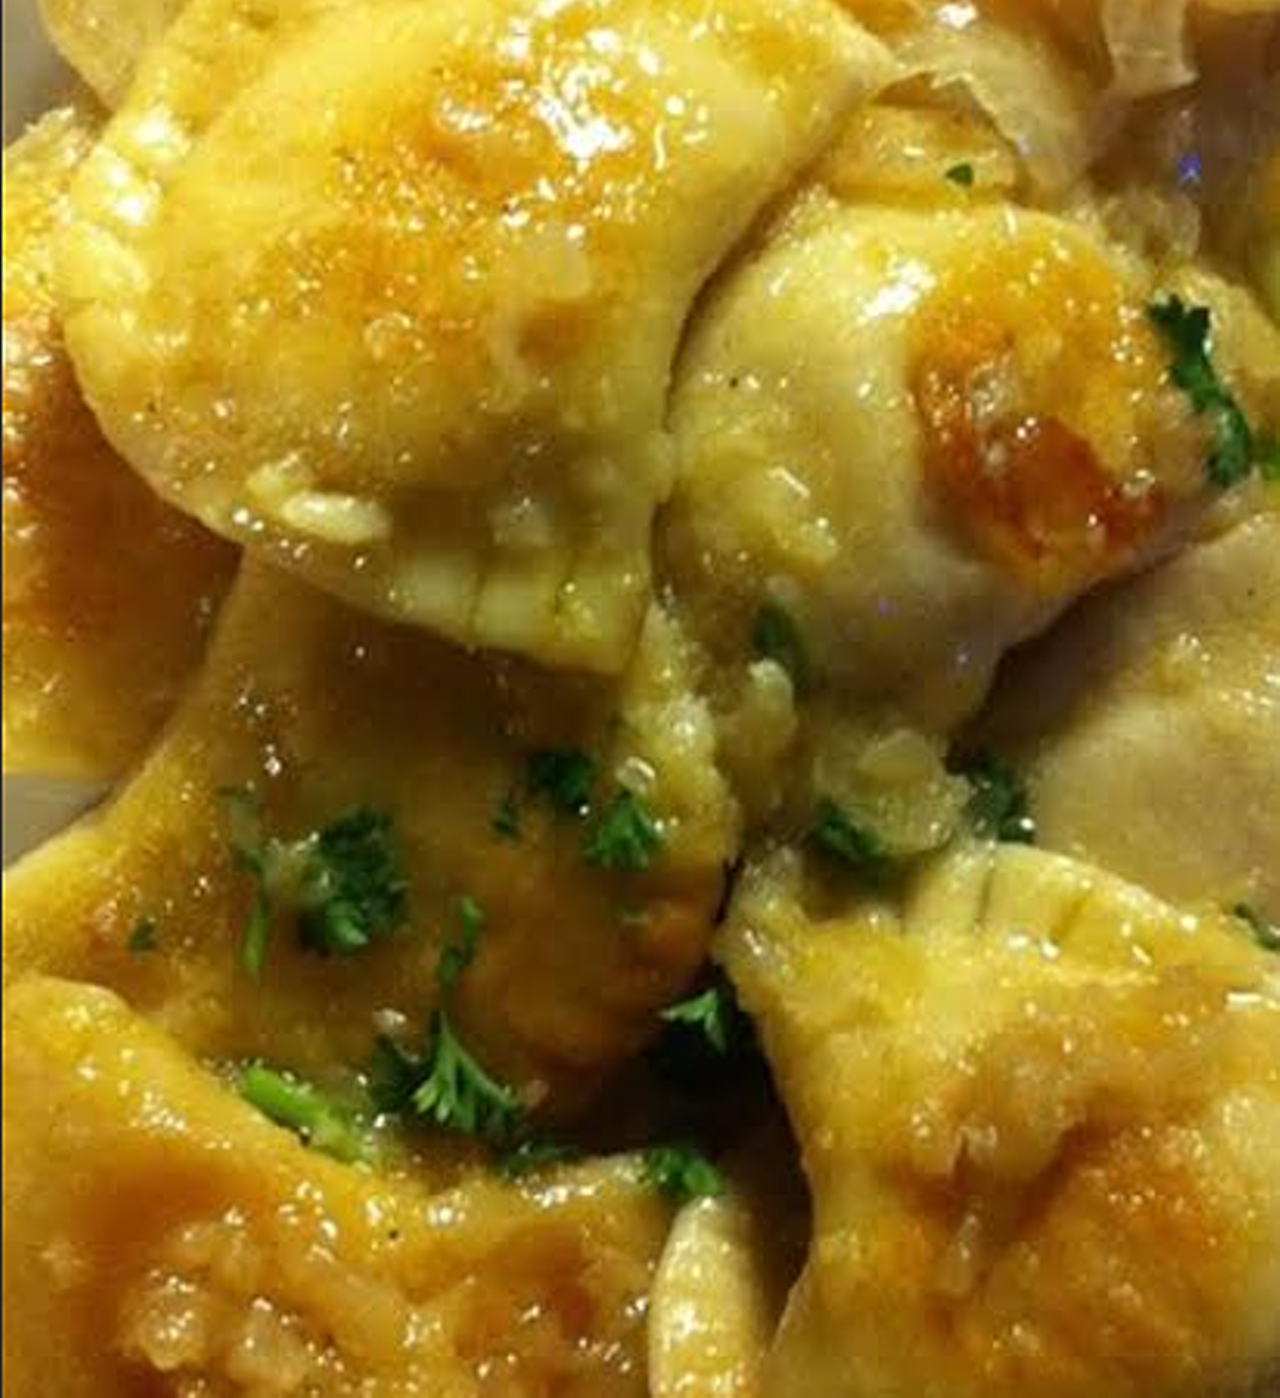 Sokolowski's University Inn - 1201 University Rd.
For over a decade, the Sokolowski family at University Inn in Tremont has been making pierogies in-house and finished with a "butter jacuzzi." You know you want to try it.